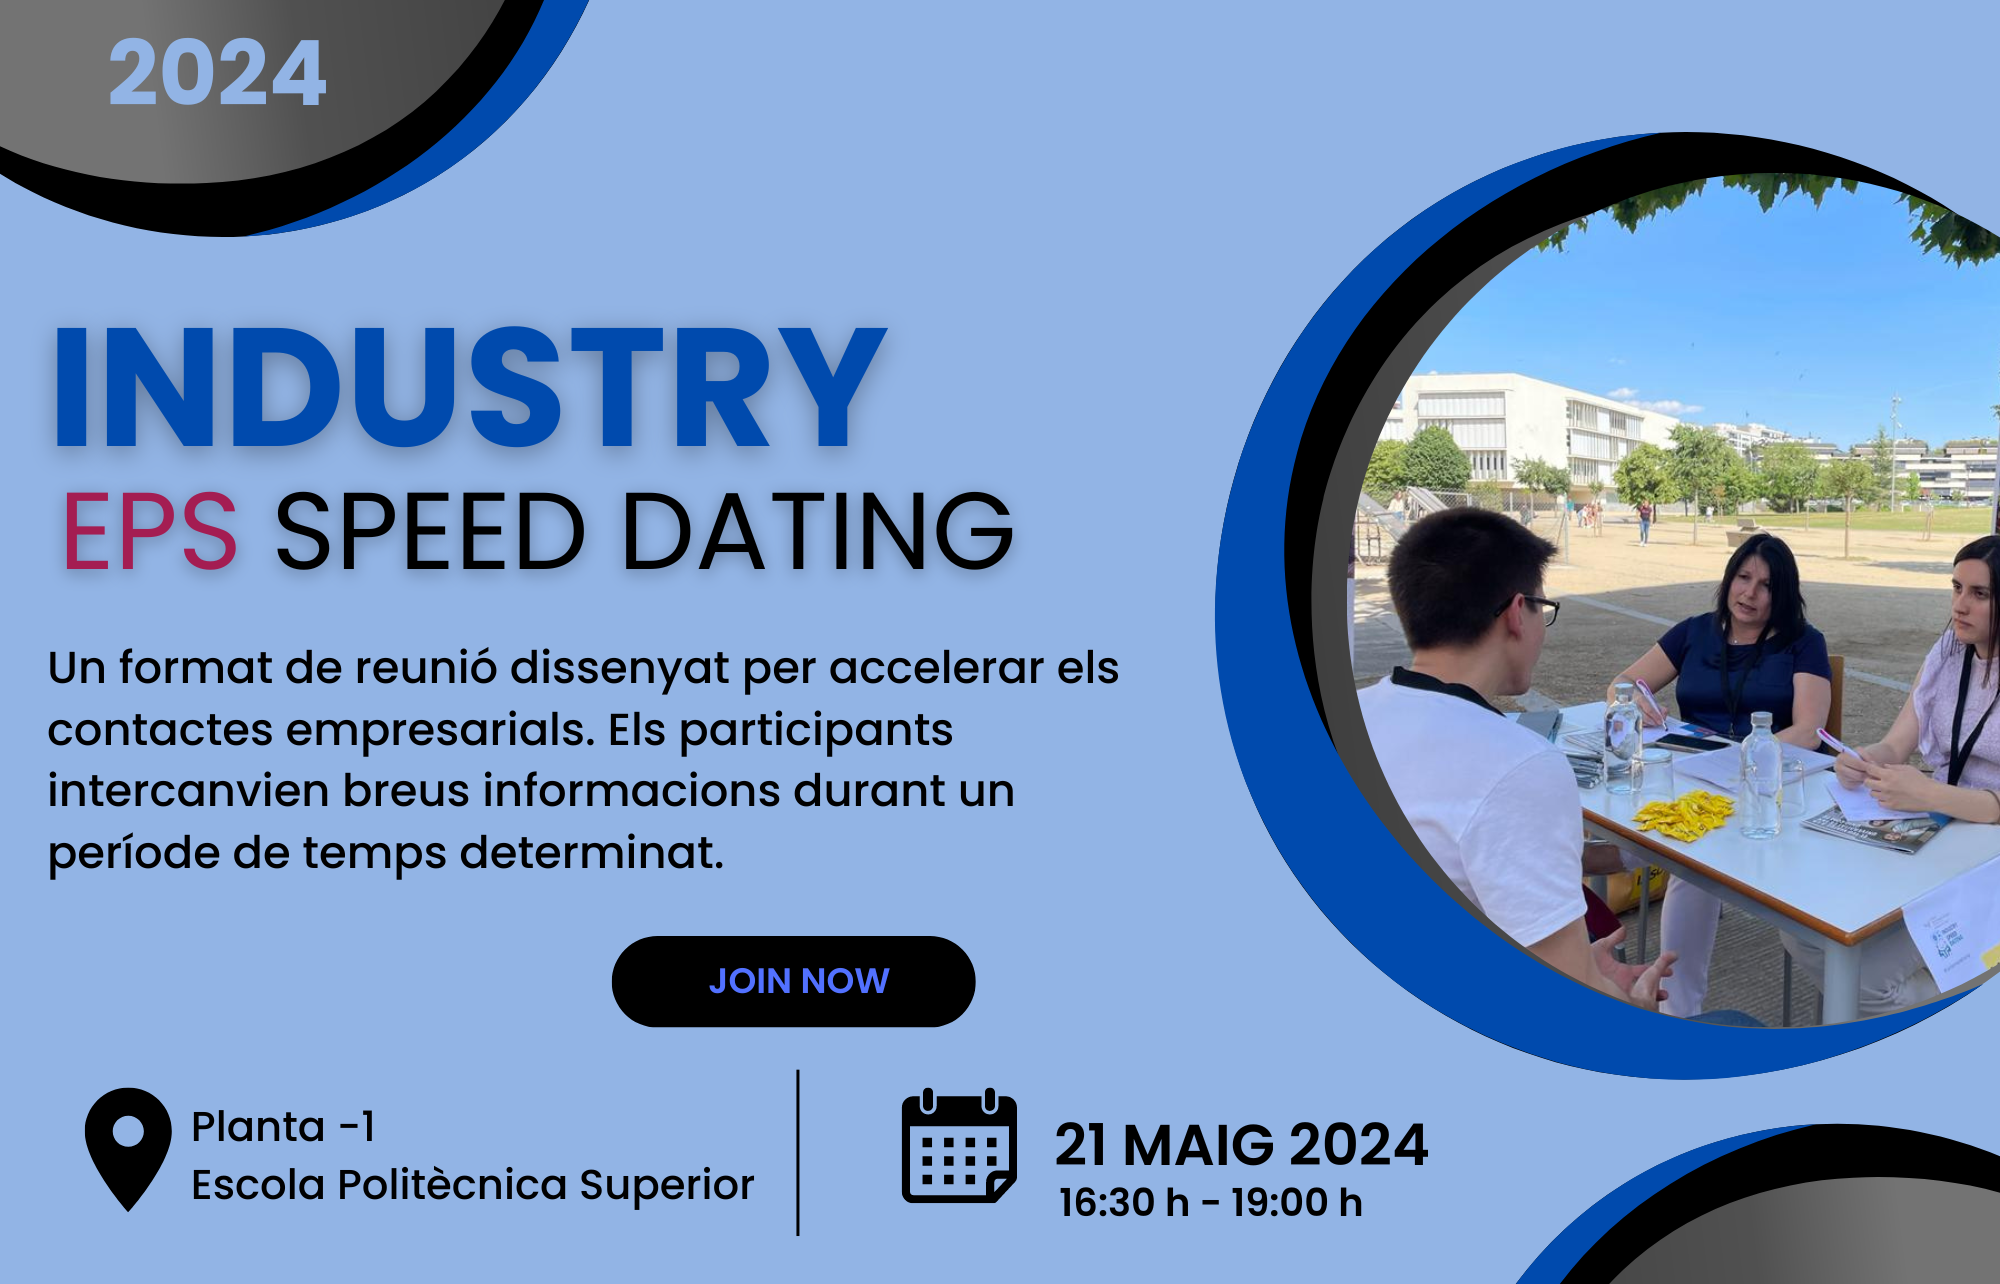 INDUSTRY EPS Speed Dating 2024